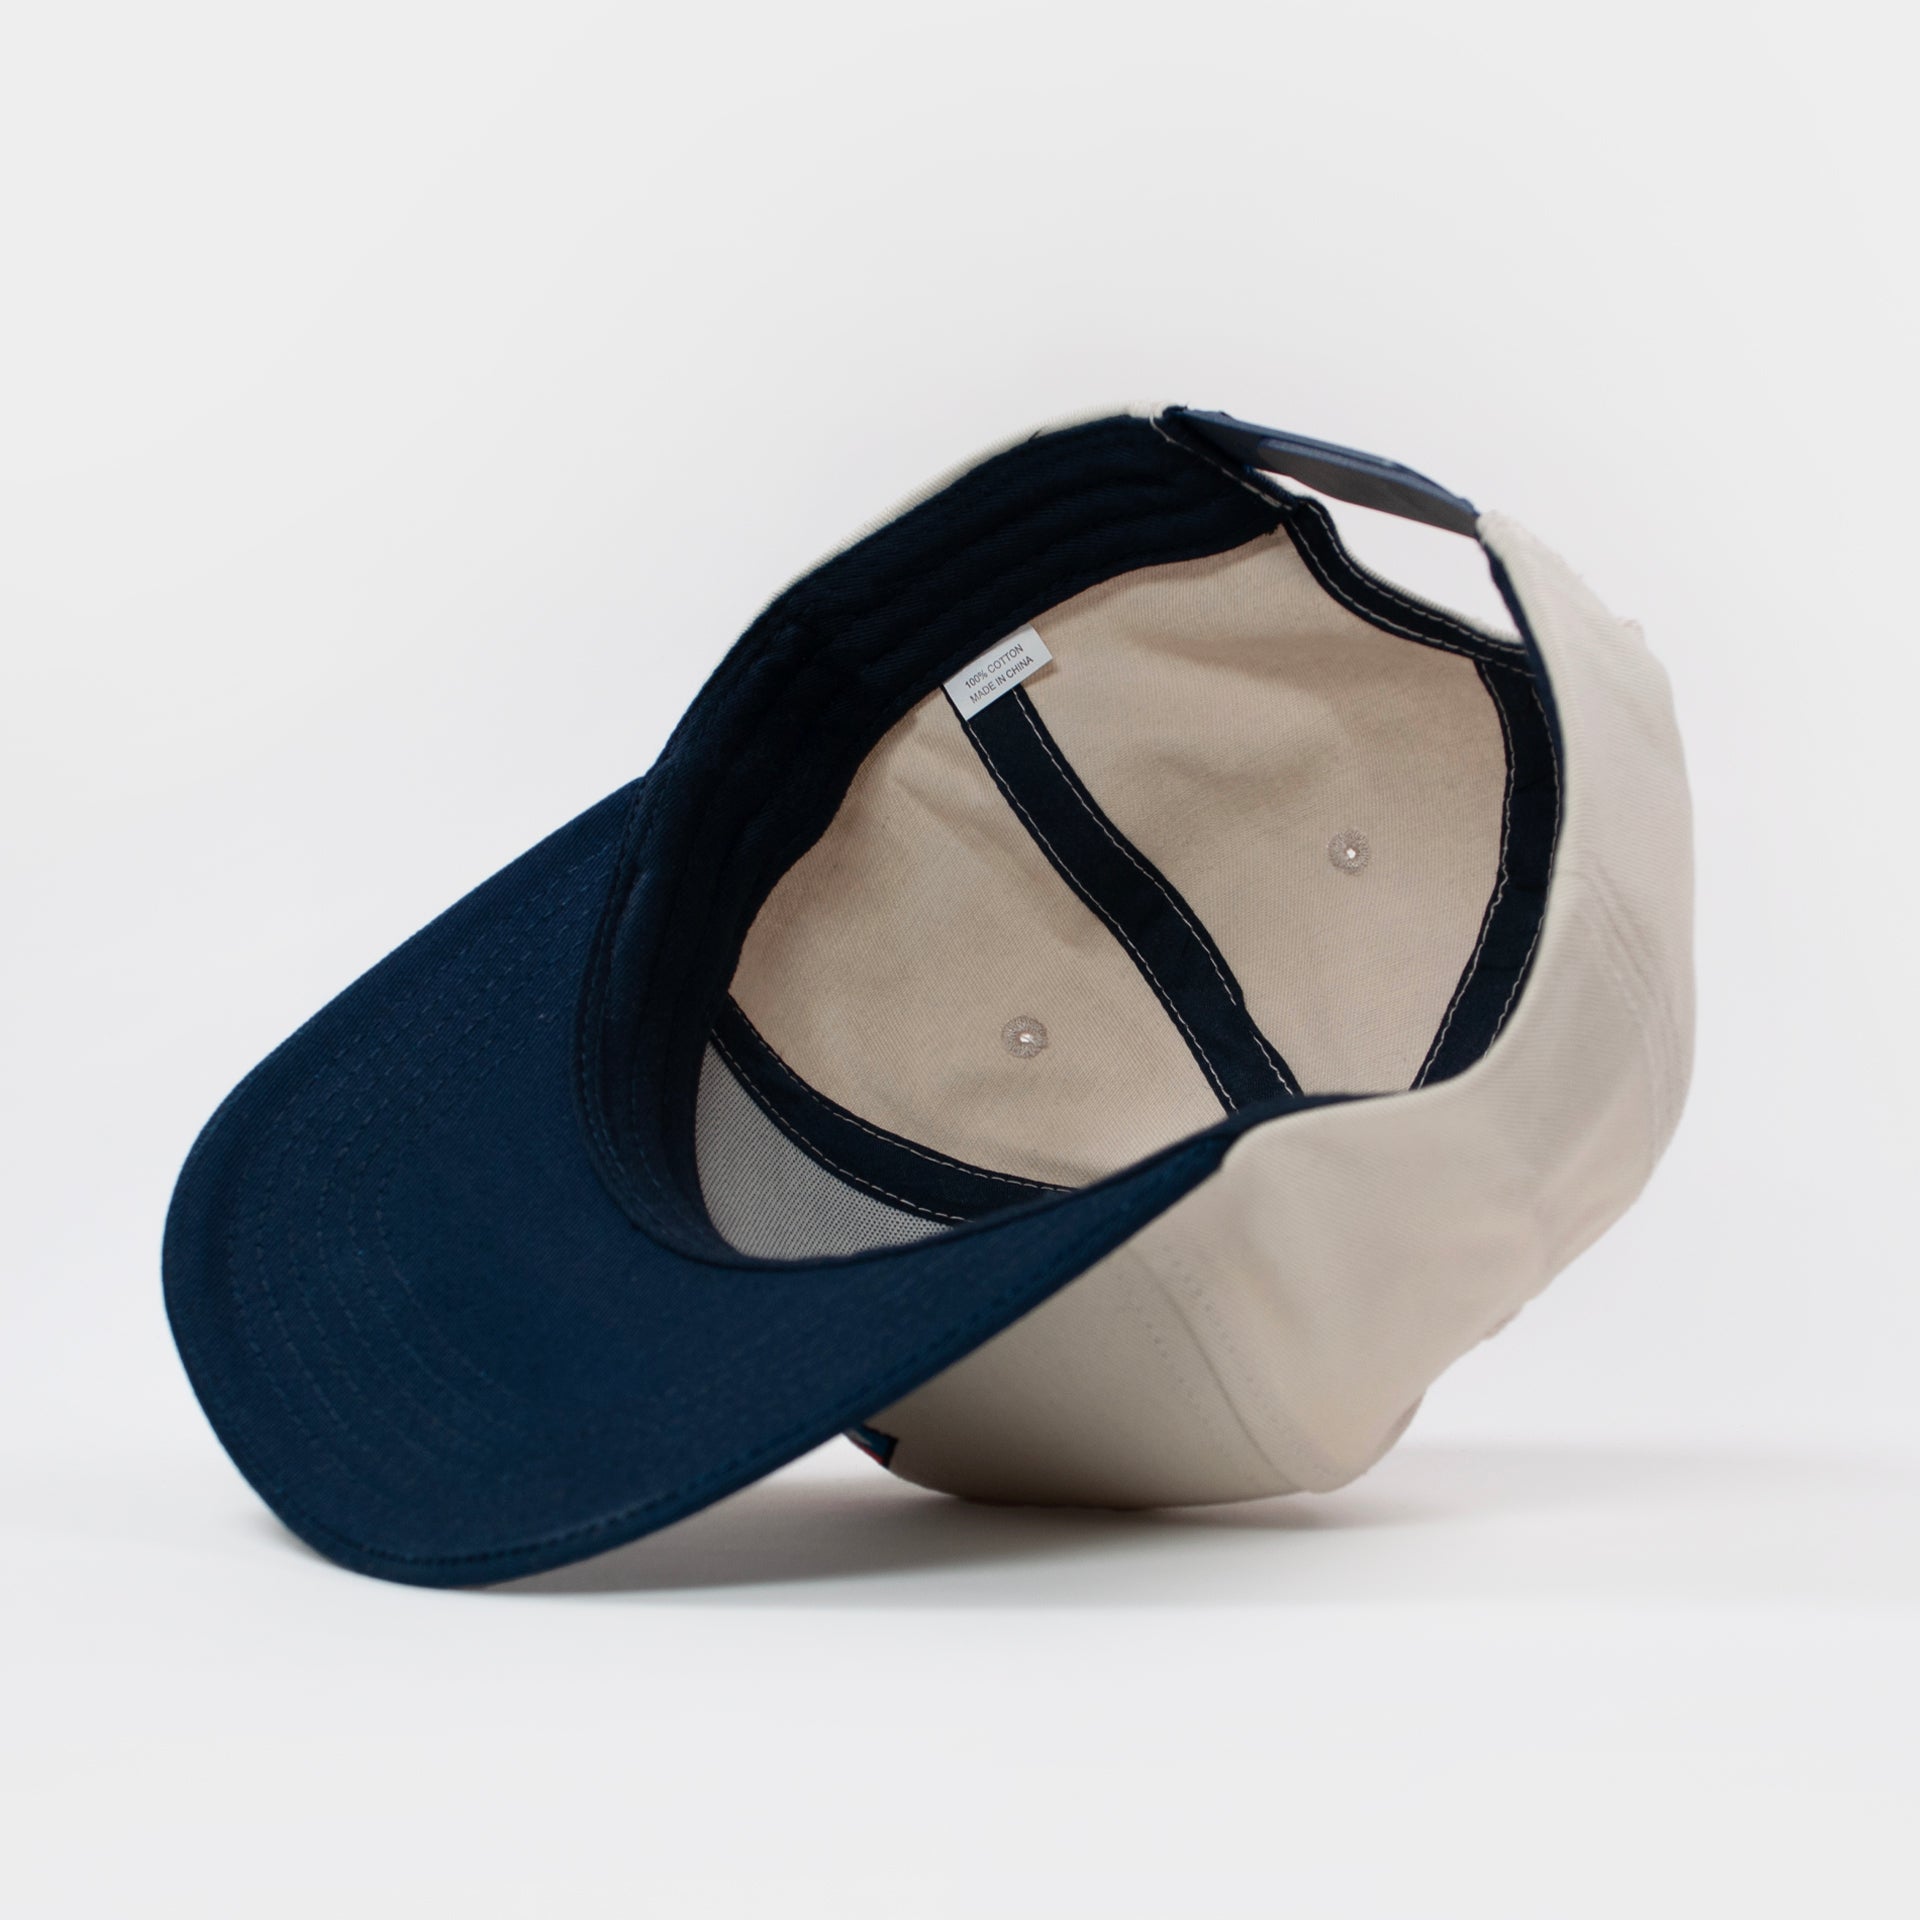 Girl Caution 6-Panel 2 Tone Hat - Sand/Navy - Prime Delux Store